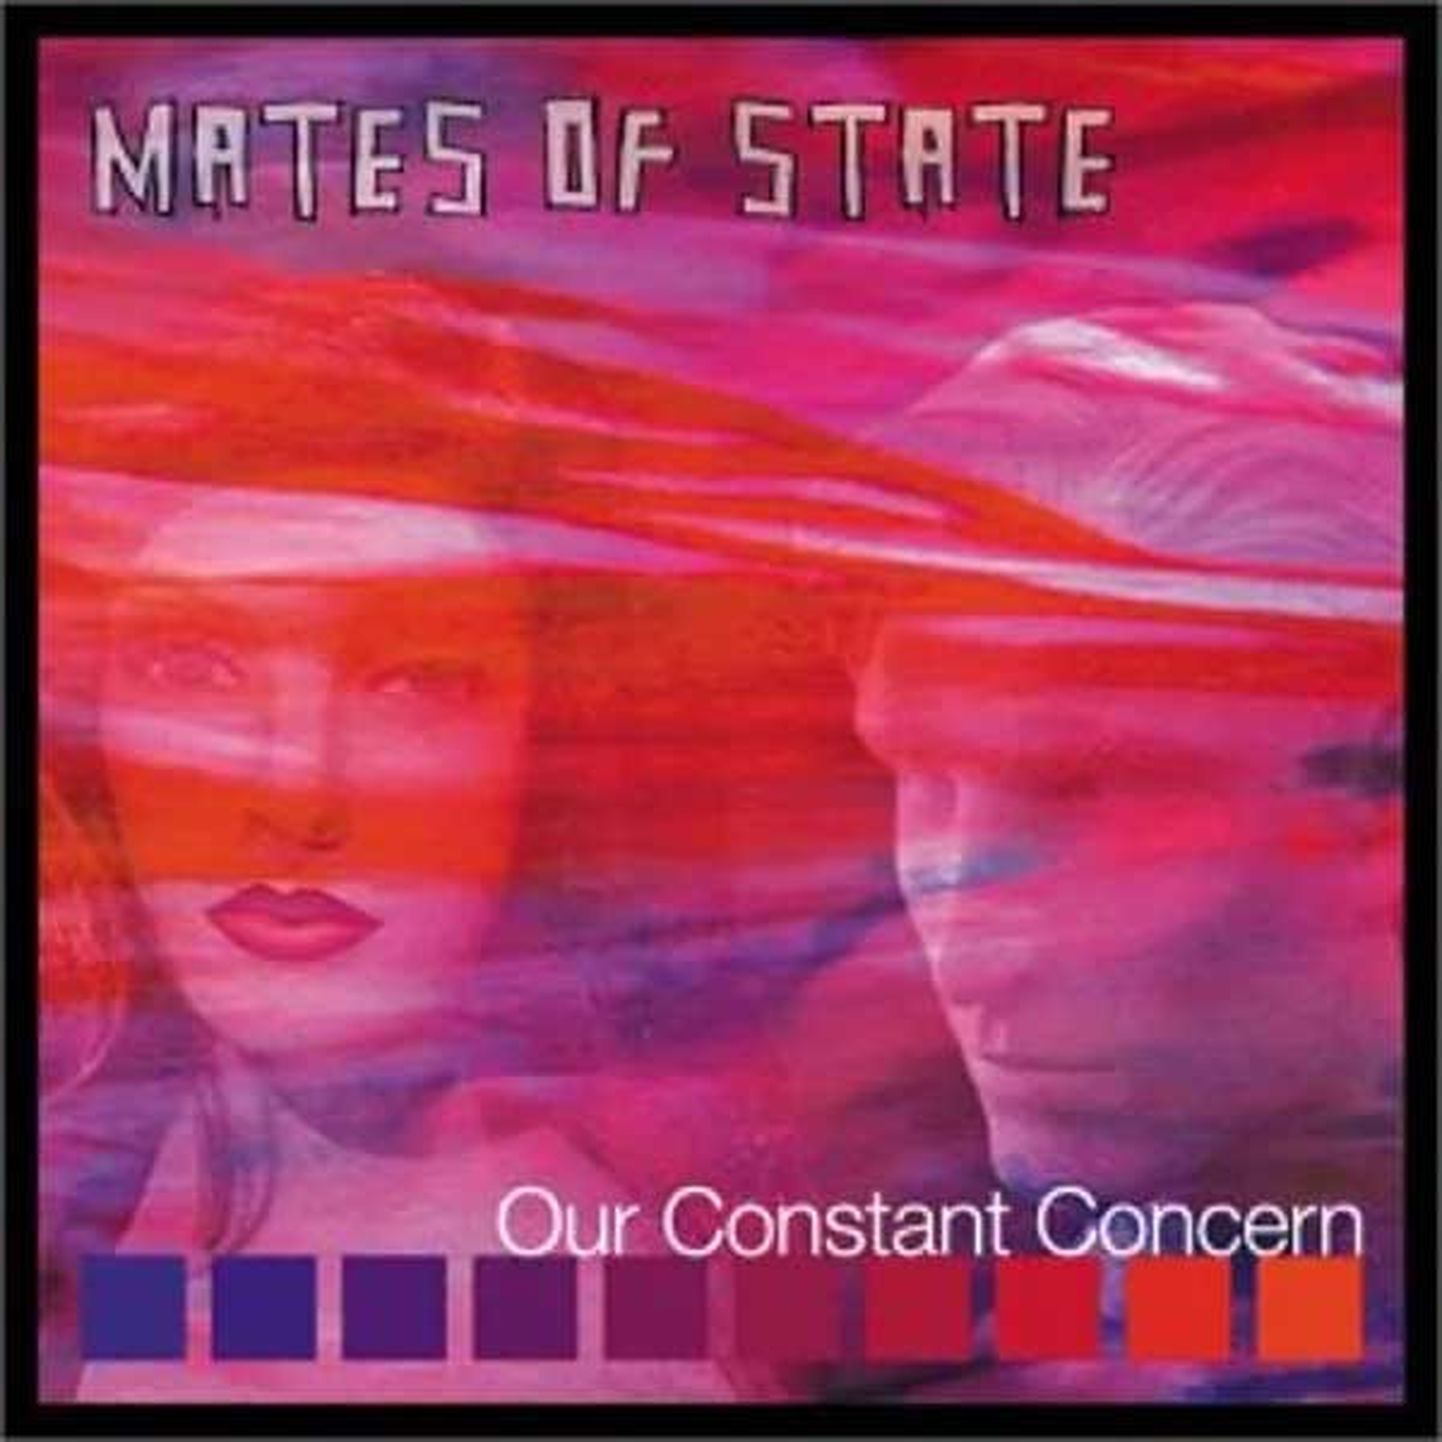 Mates Of State "Our Constant Concern"